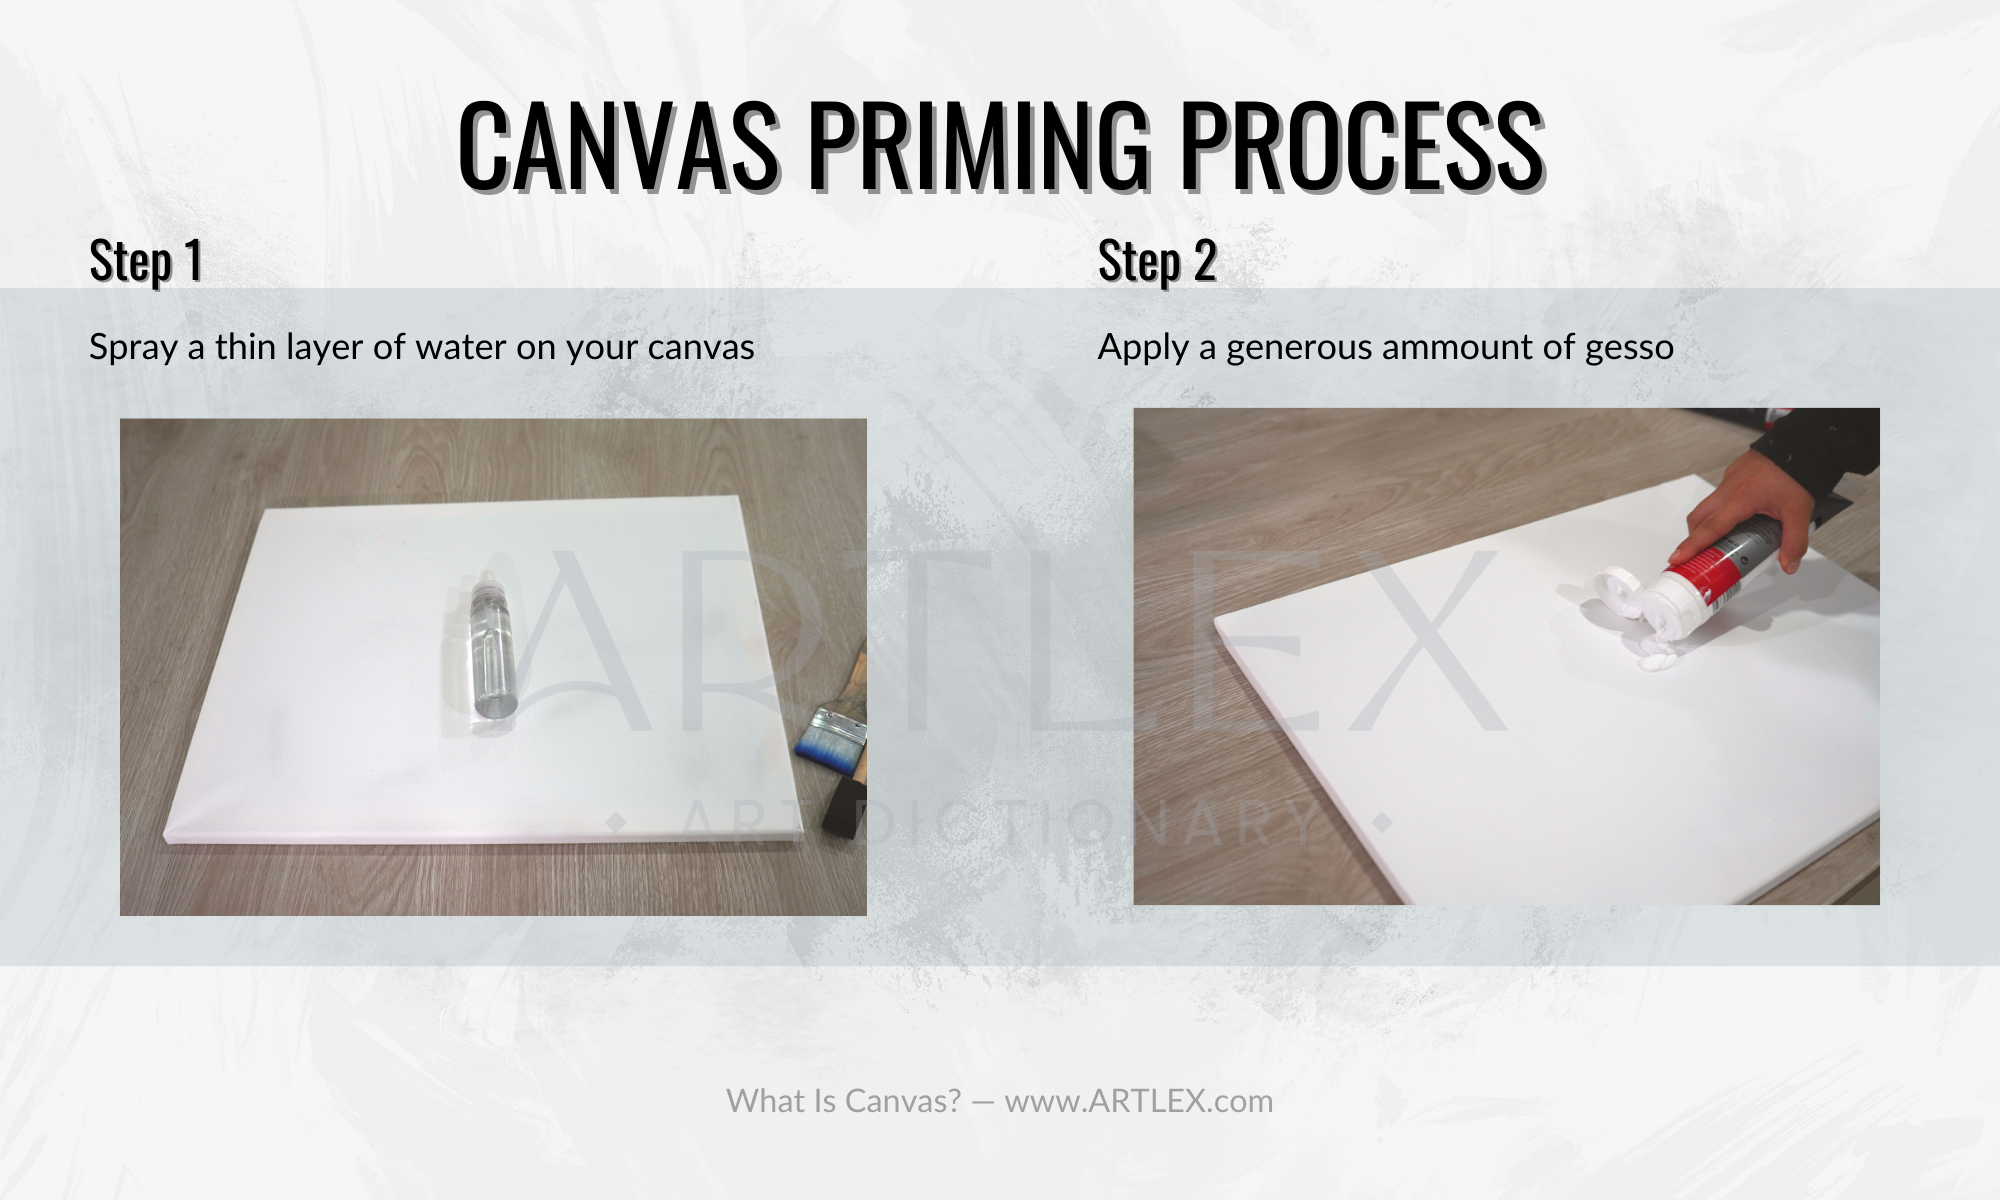 6 Easy Steps To Prime Your Canvas With Acrylic Gesso BC Media